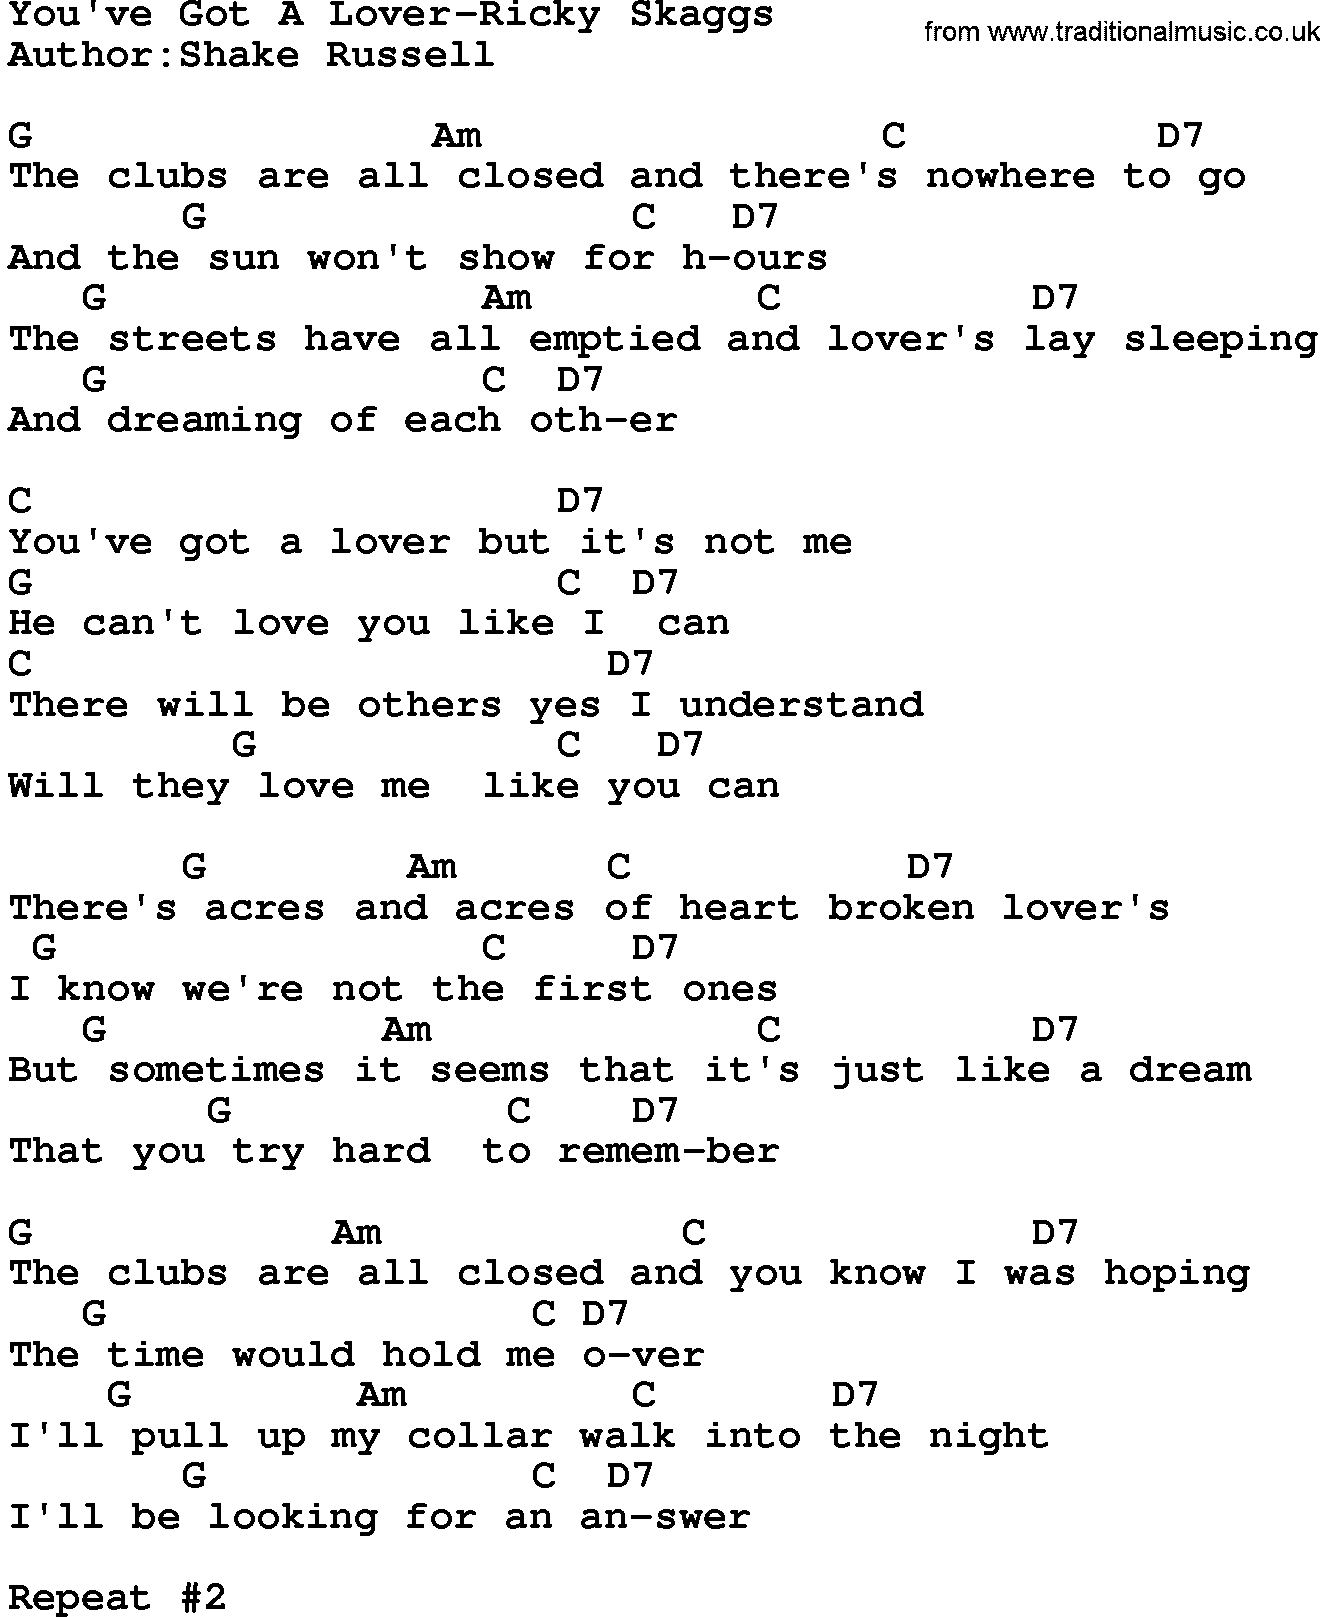 Country music song: You've Got A Lover-Ricky Skaggs lyrics and chords